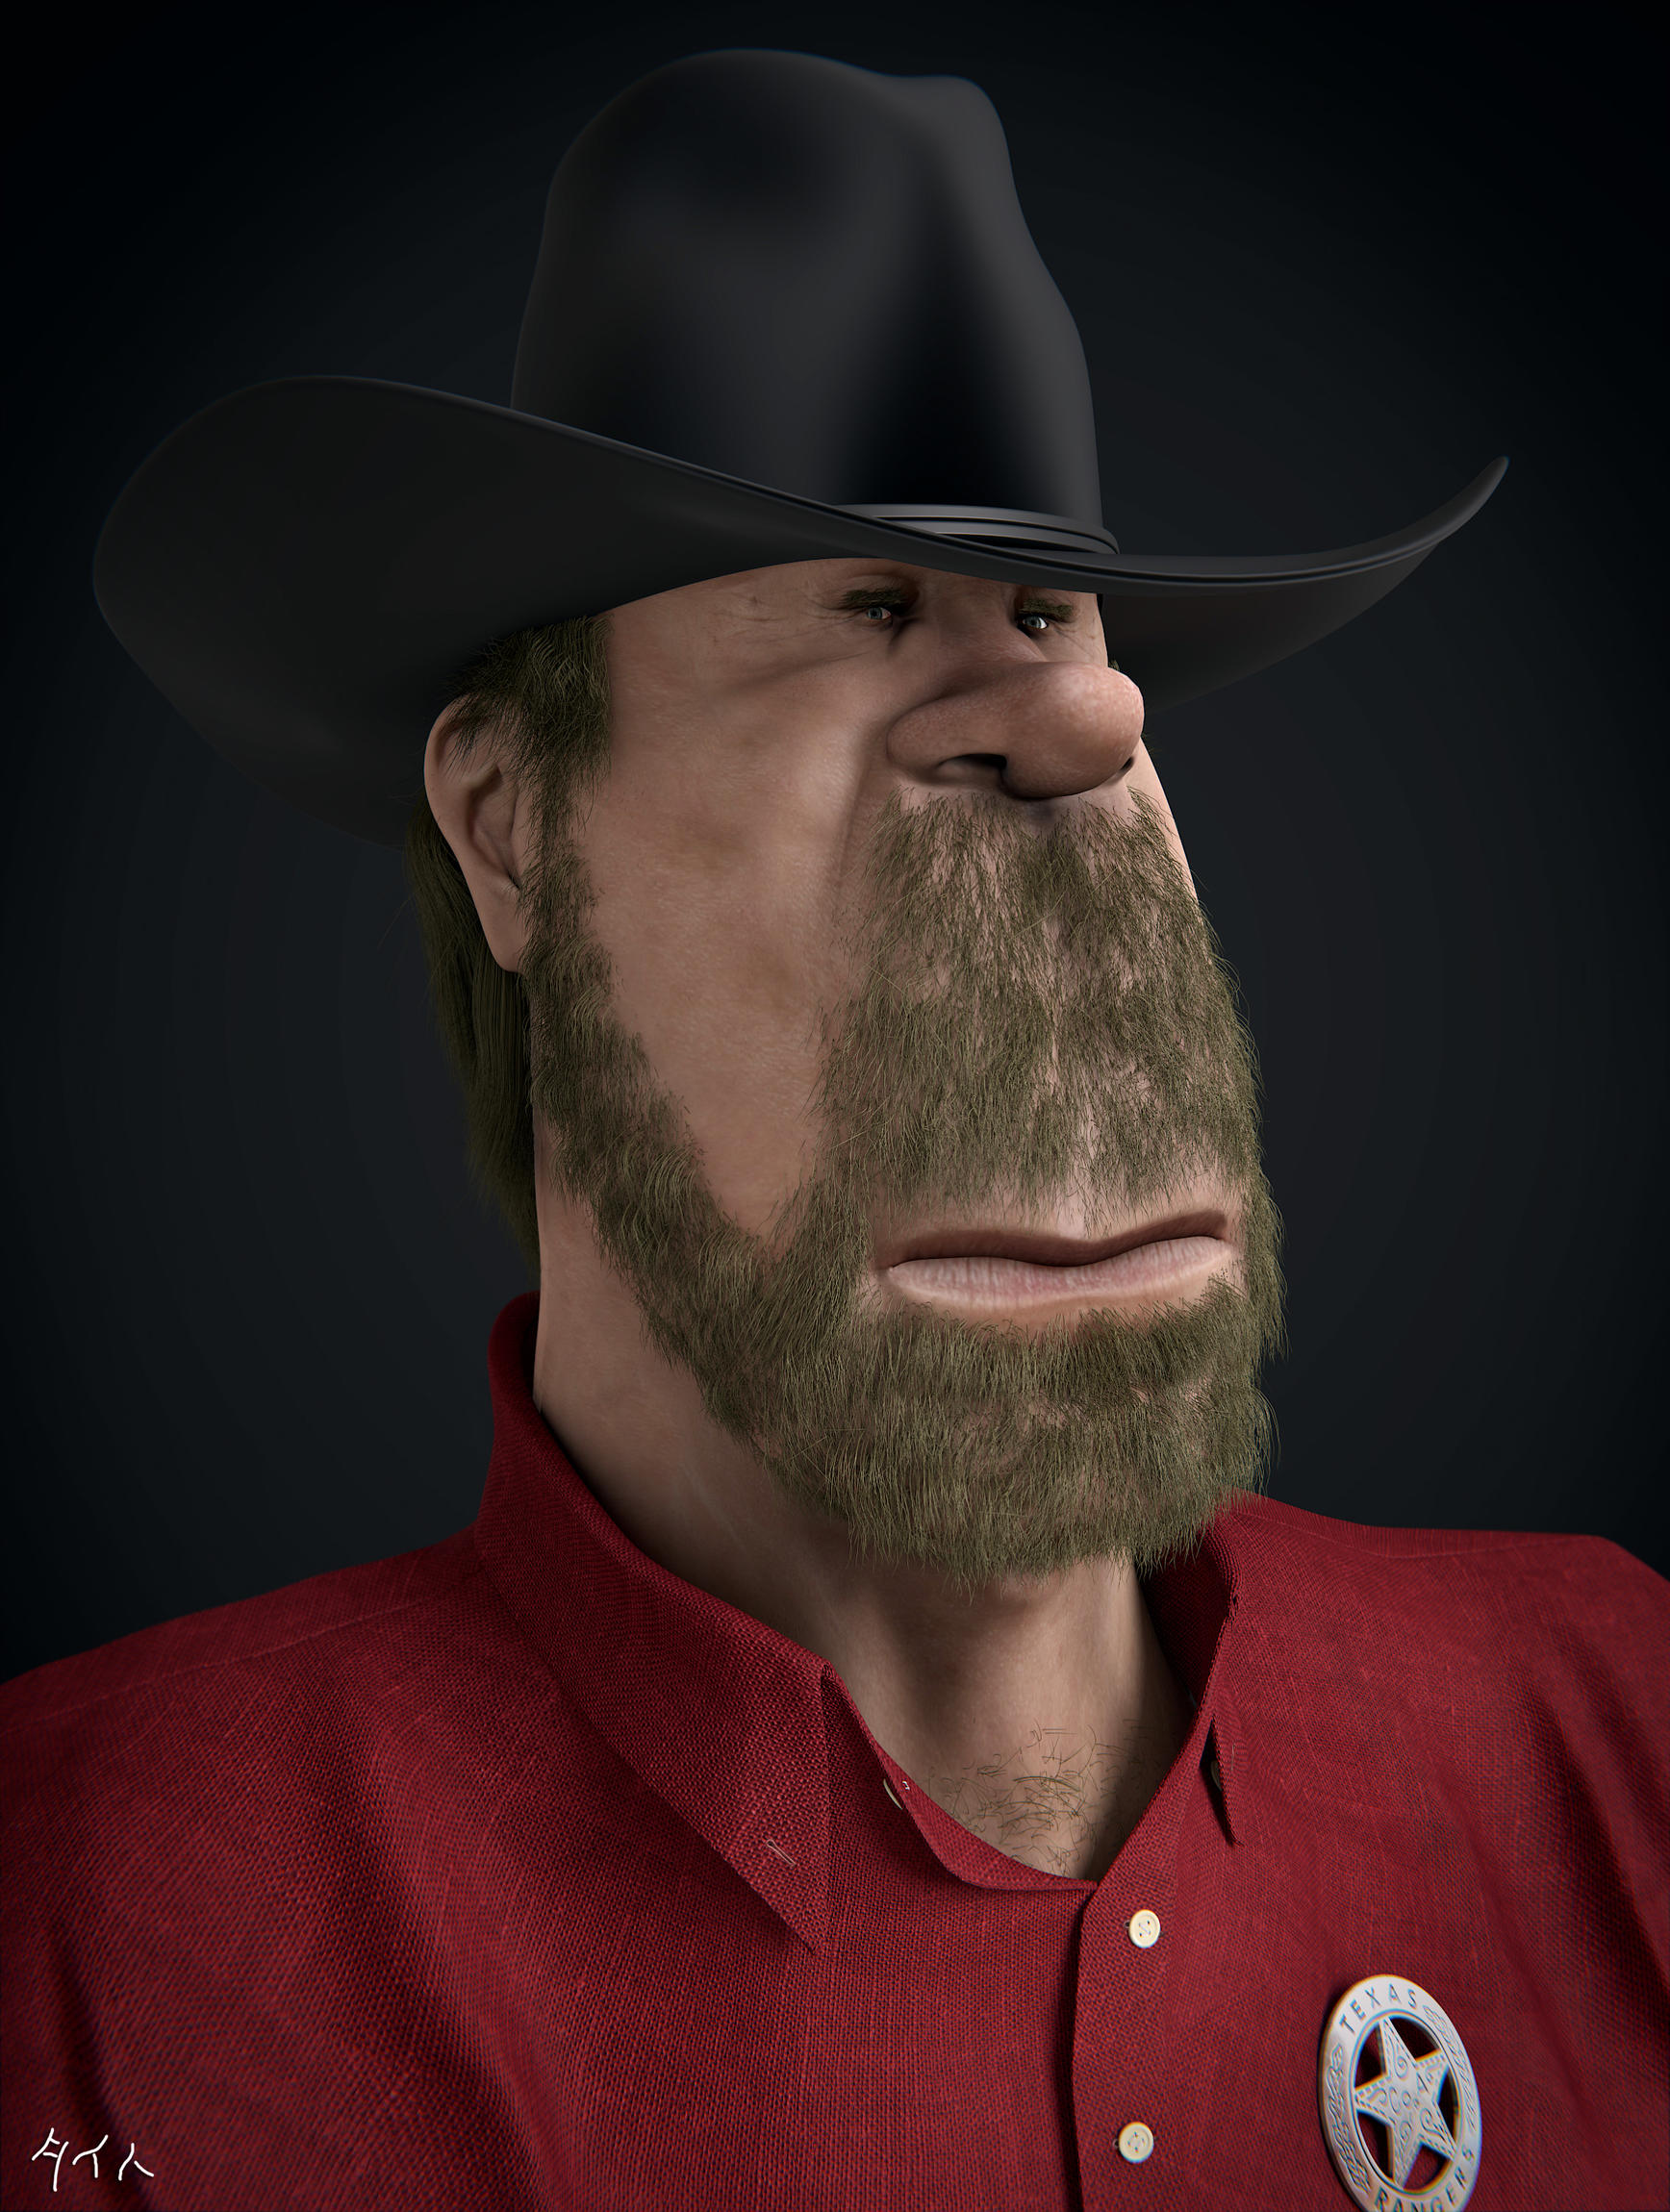 Chuck Norris Cartoon - Finished Projects - Blender Artists Community